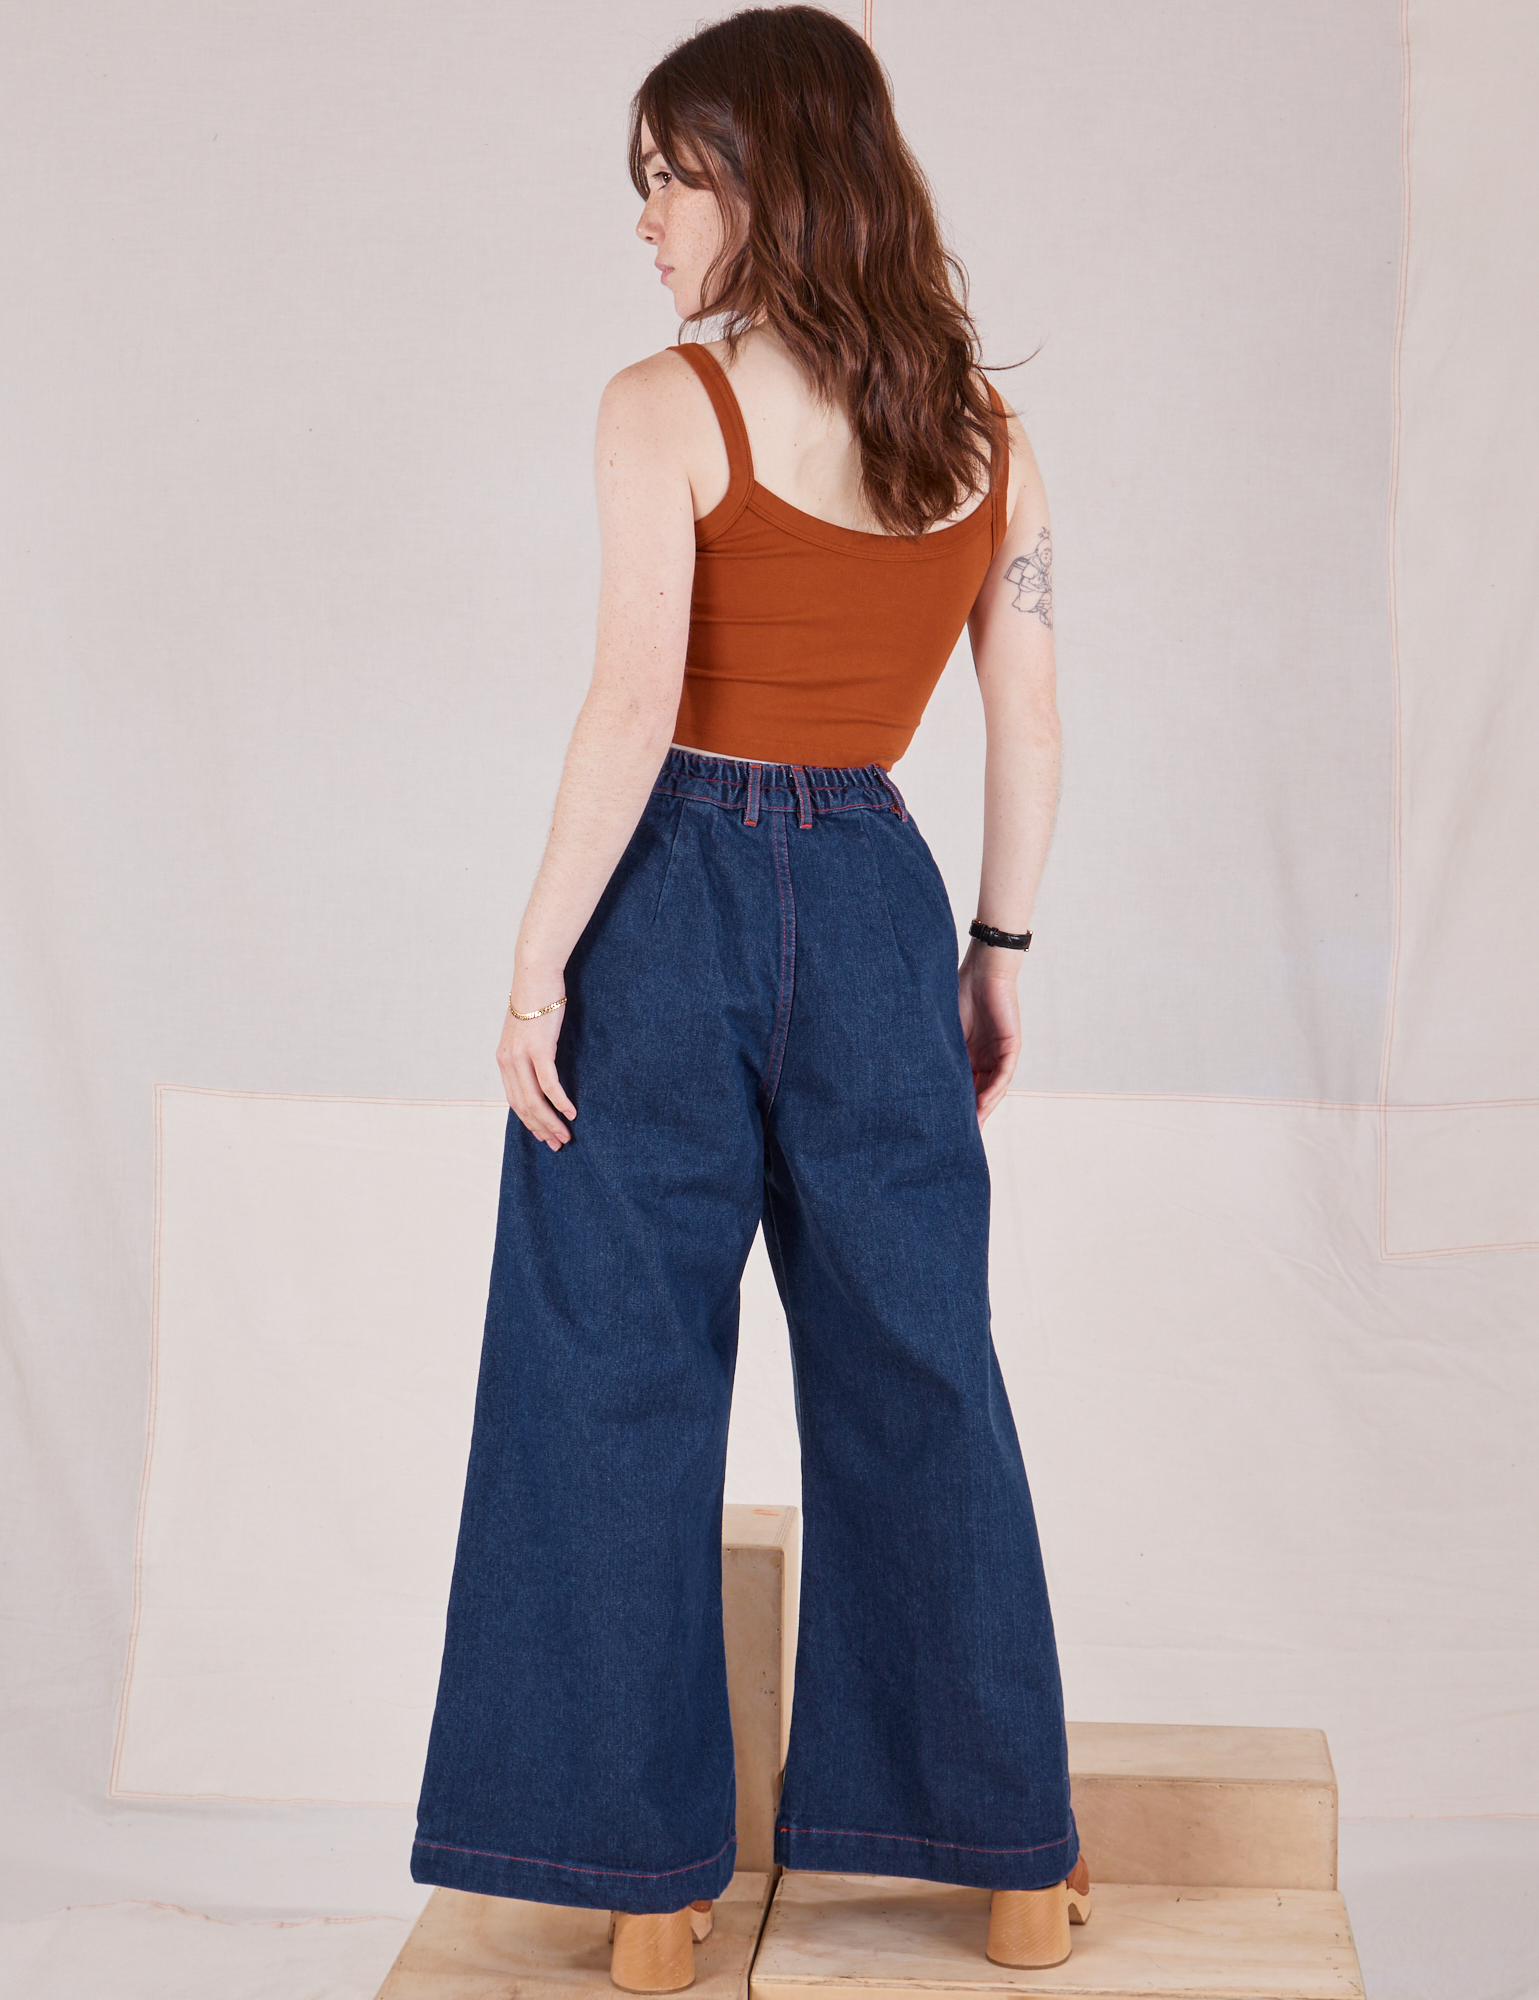 Back view of Indigo Wide Leg Trousers in Dark Wash and burnt terracotta Cropped Cami on Hana